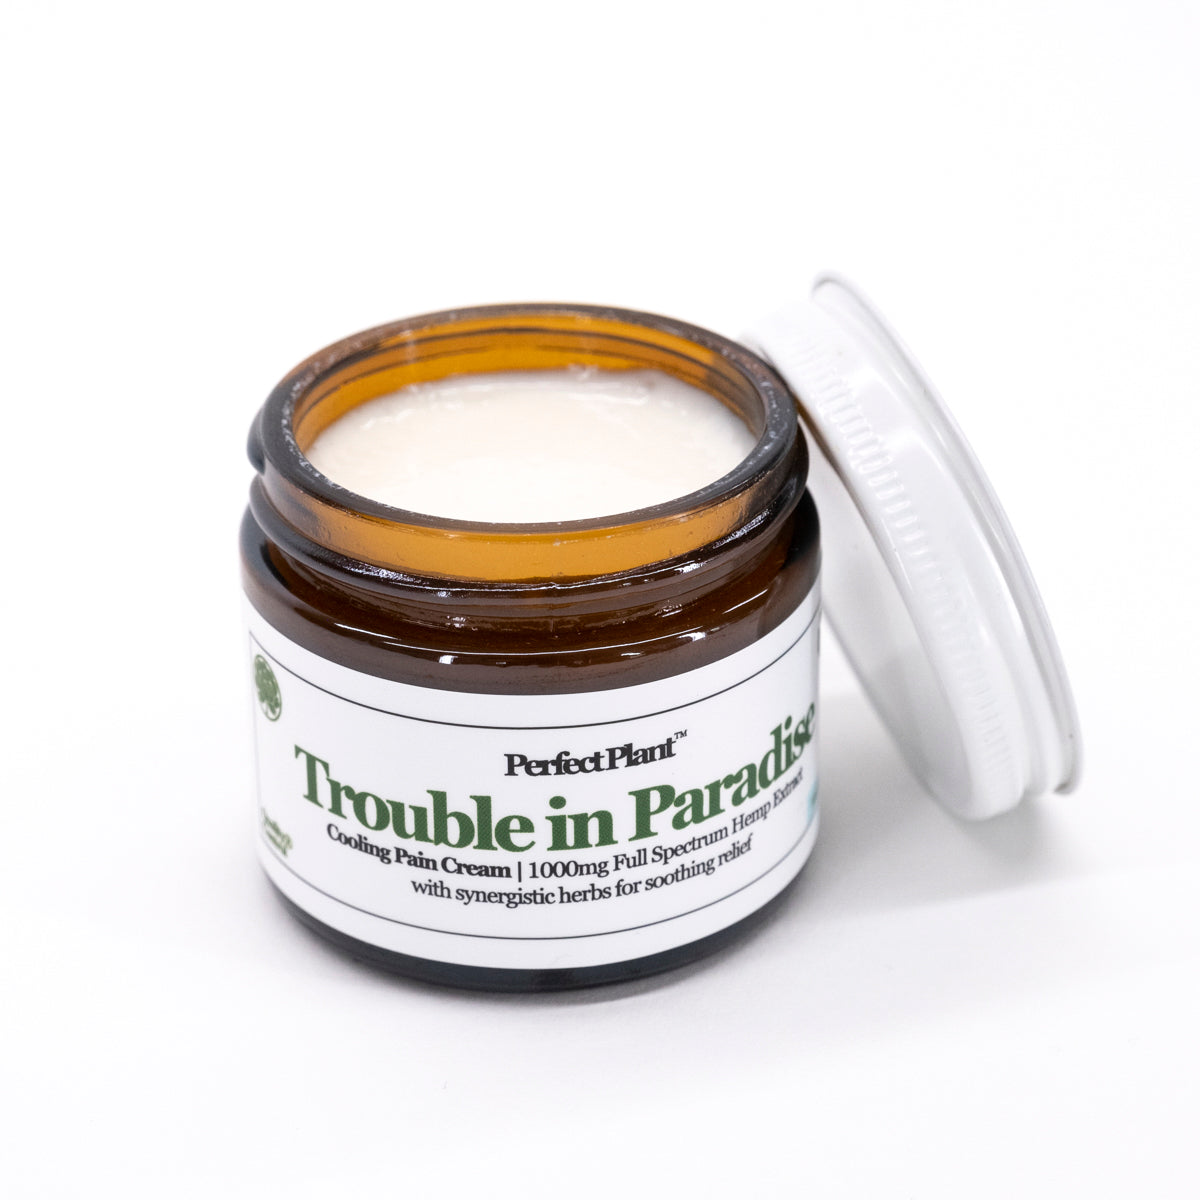 Trouble in Paradise (Cooling Pain Cream-1000mg)